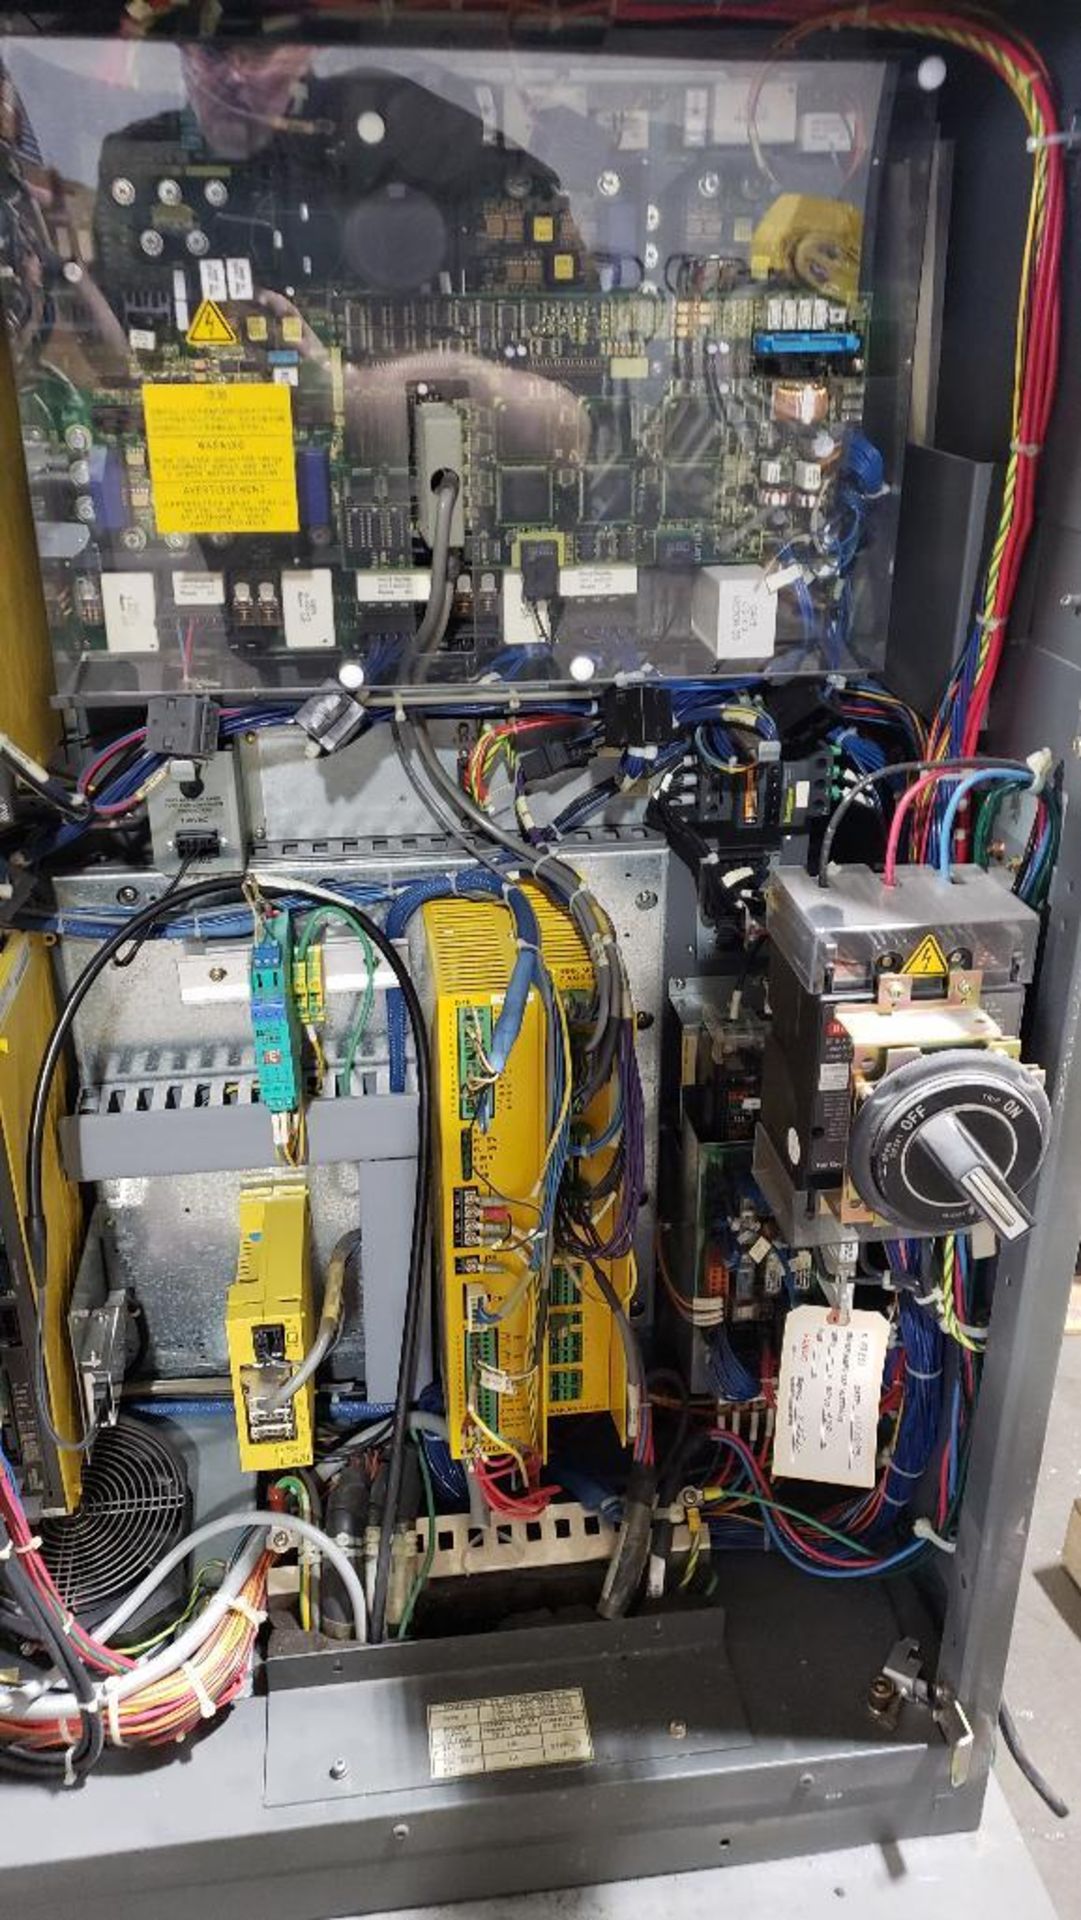 Fanuc R-2000iA/200F robot with Fanuc System R-J3iB controller. - Image 13 of 13